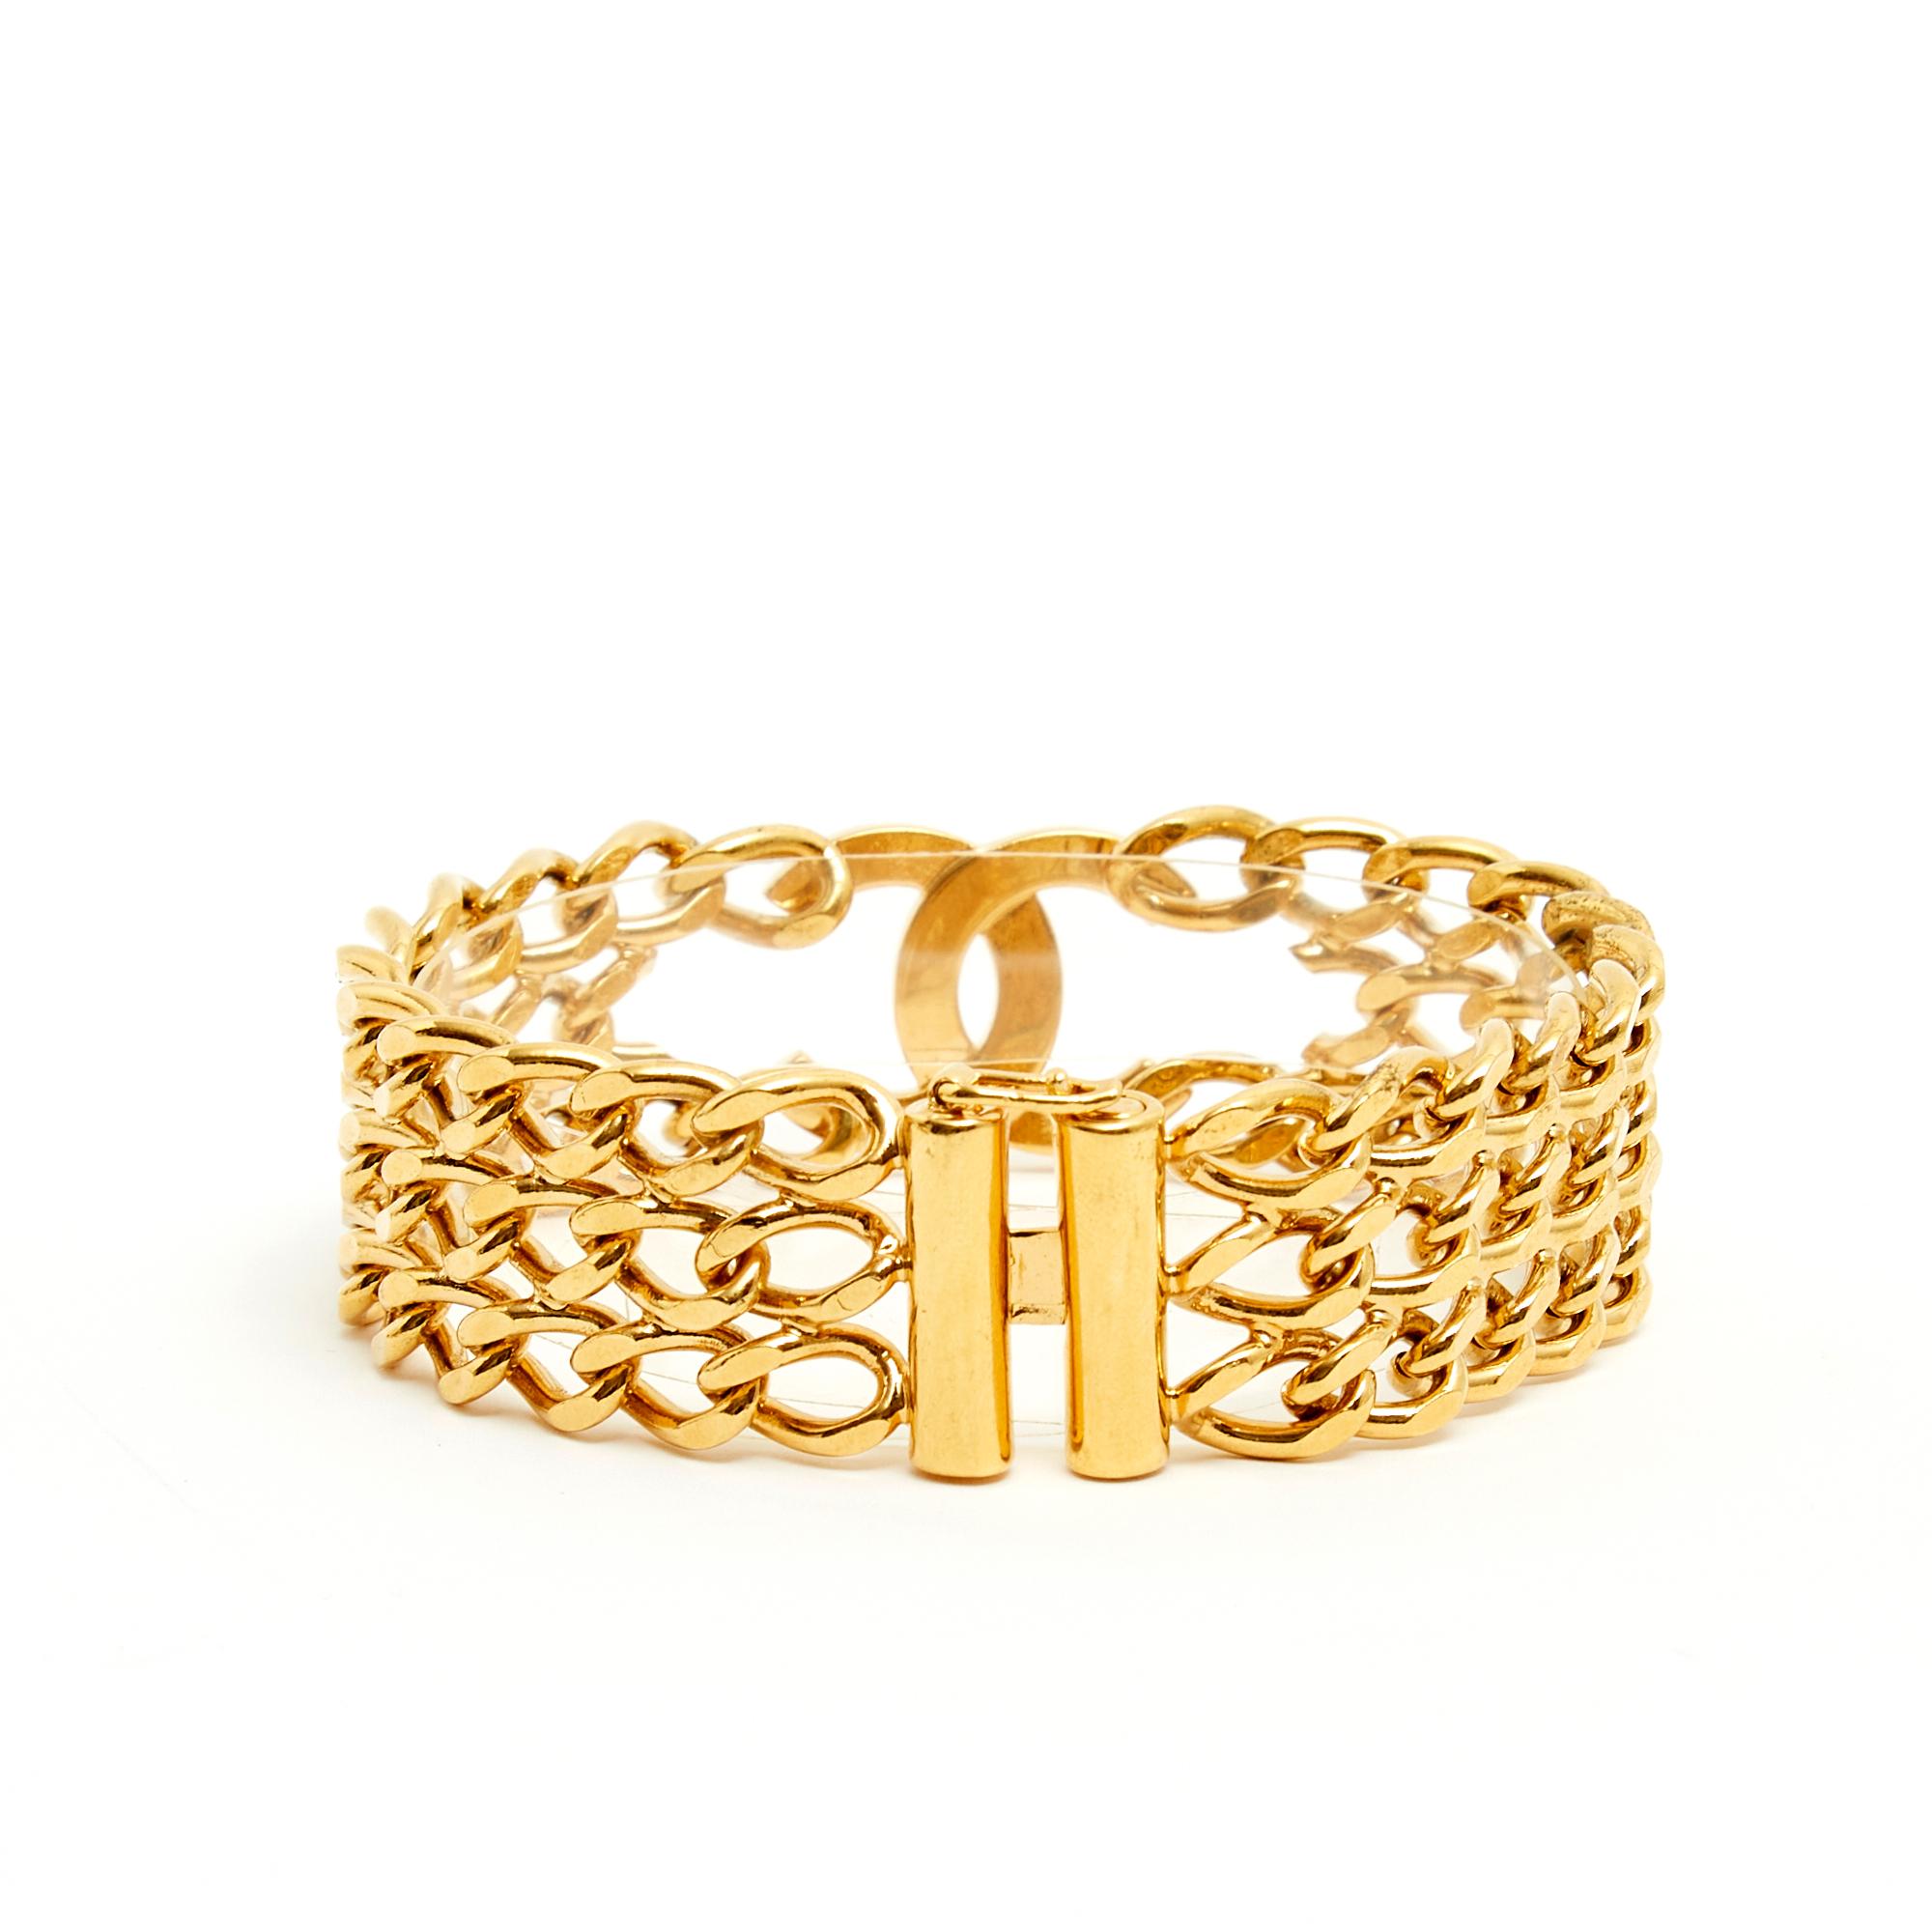 Chanel bracelet from the Spring Summer 1997 collection, composed of 3 chains in gilded metal adorned with the CC logo in the central motif, sliding closure with safety. Length (closed) 20.5 cm, width of the bracelet 2.2 cm, dimensions of the CC 3.3